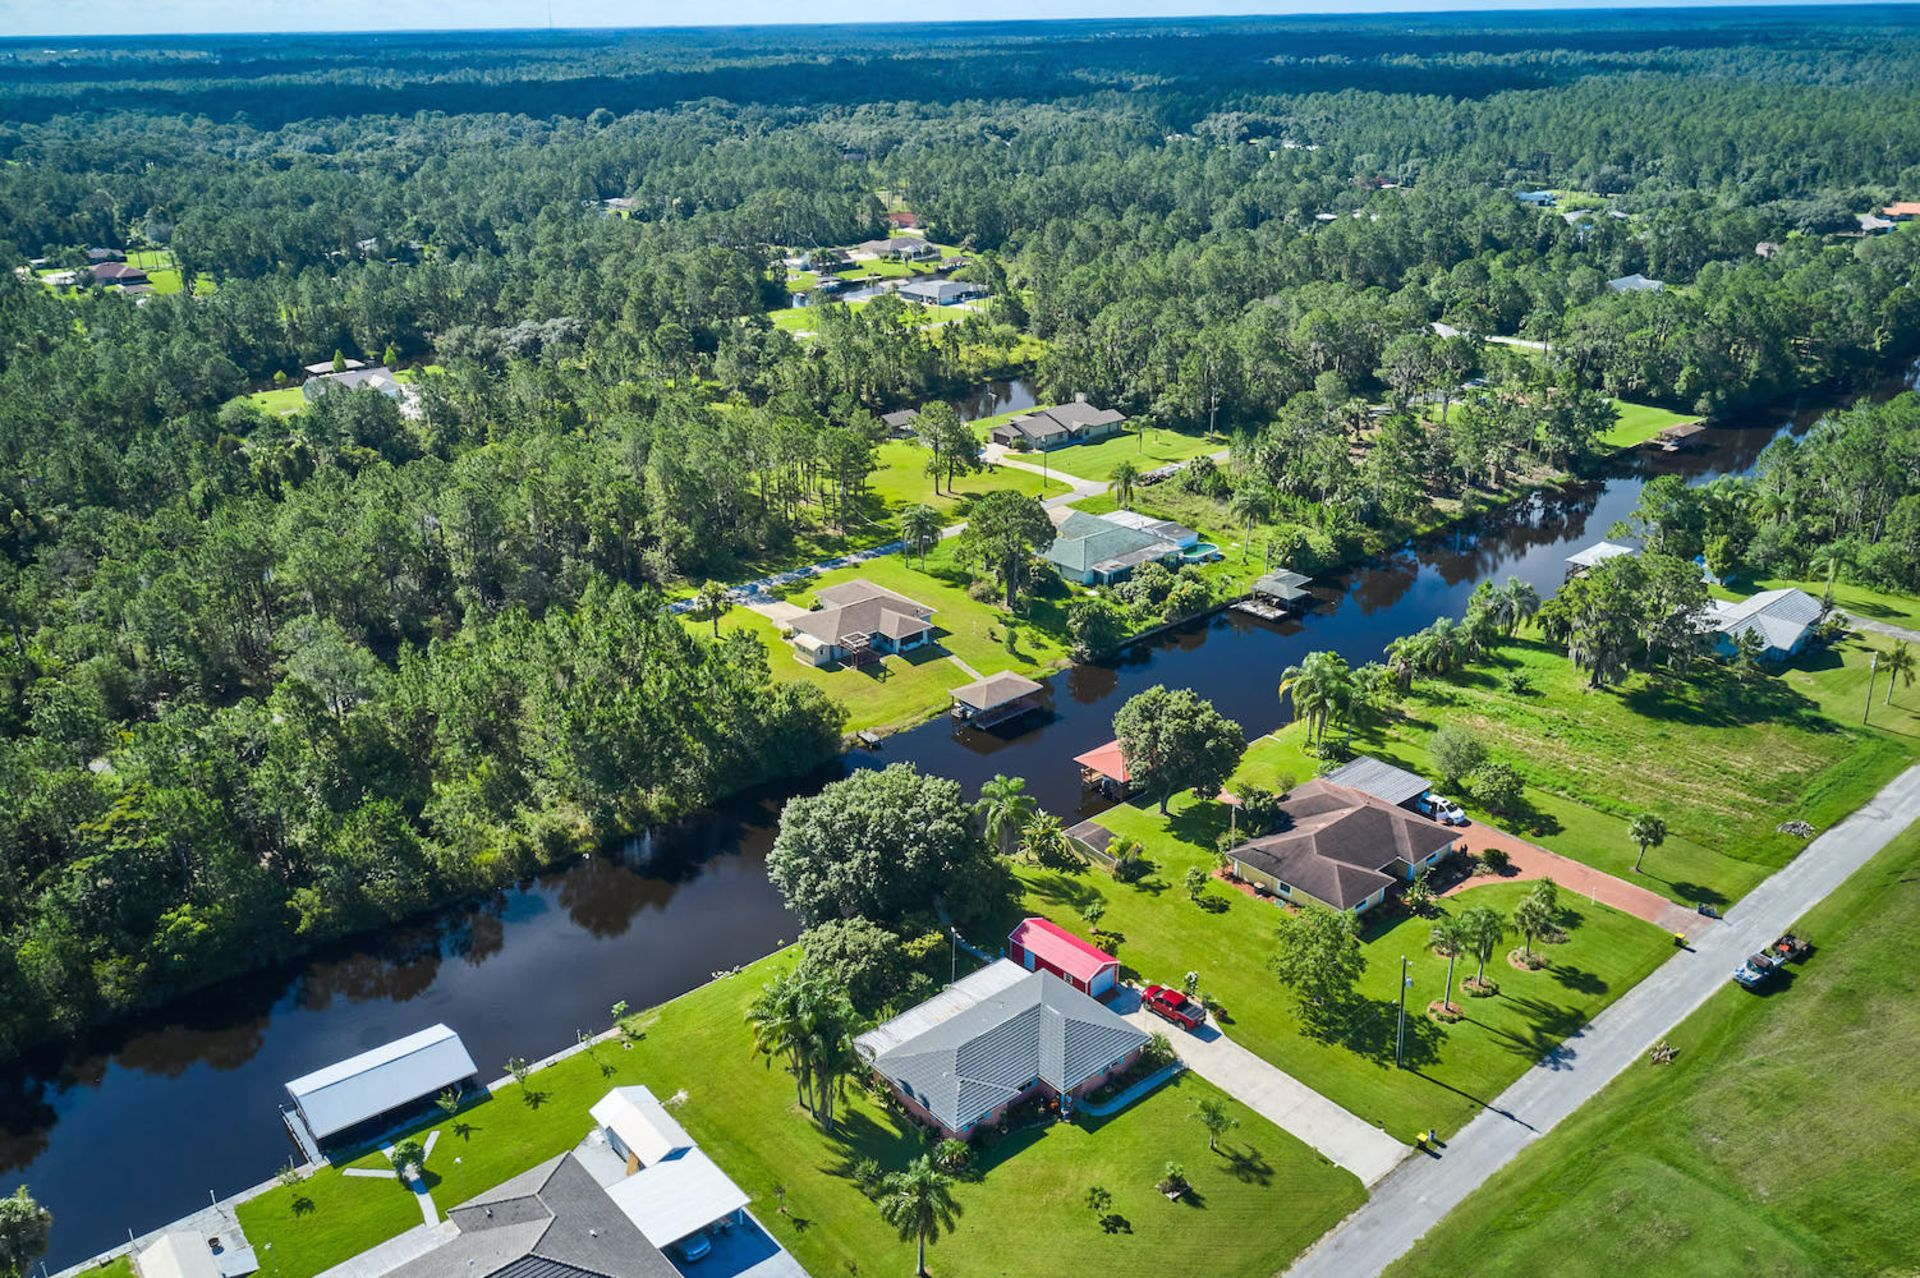 Build Your Escape to the Sunshine State on this Half-Acre Lot in Florida! - Image 5 of 11